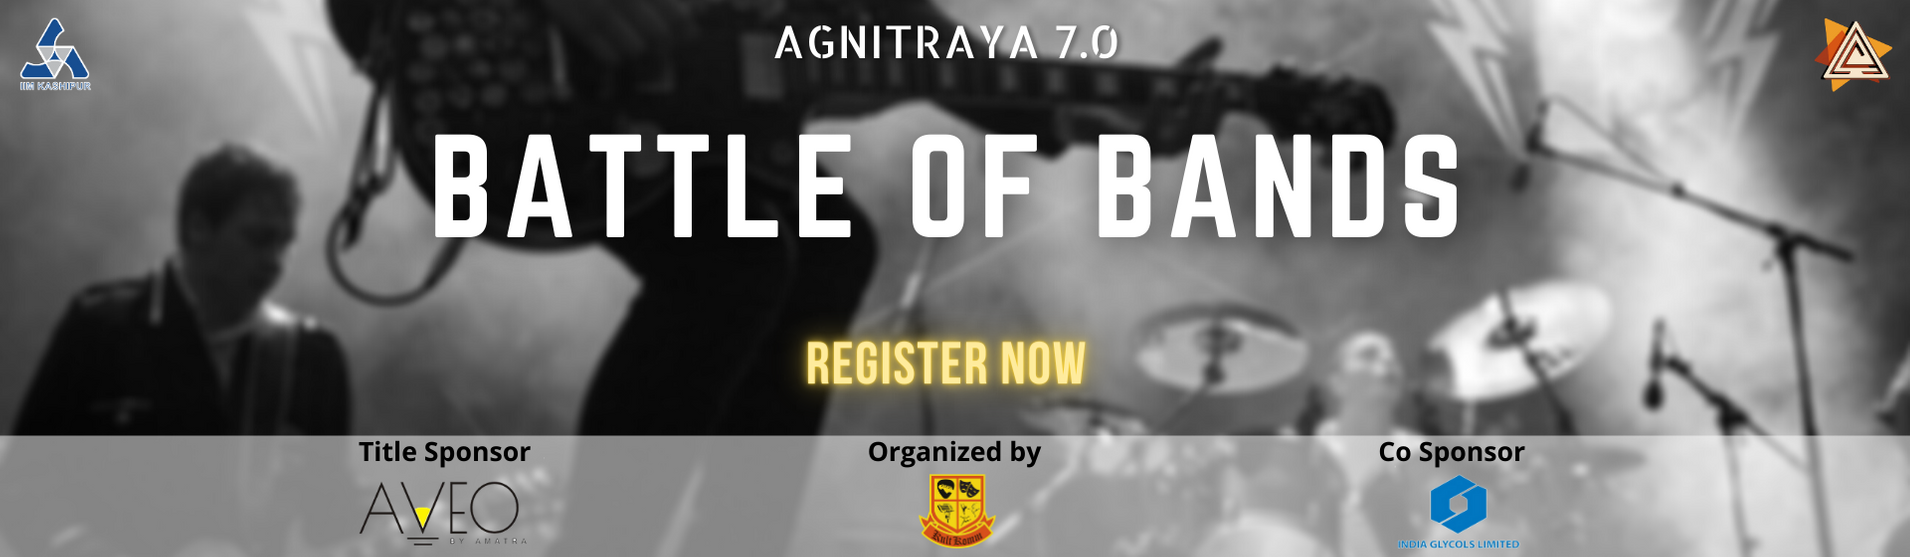 Battle of Bands by Indian Institute of Management (IIM), Kashipur